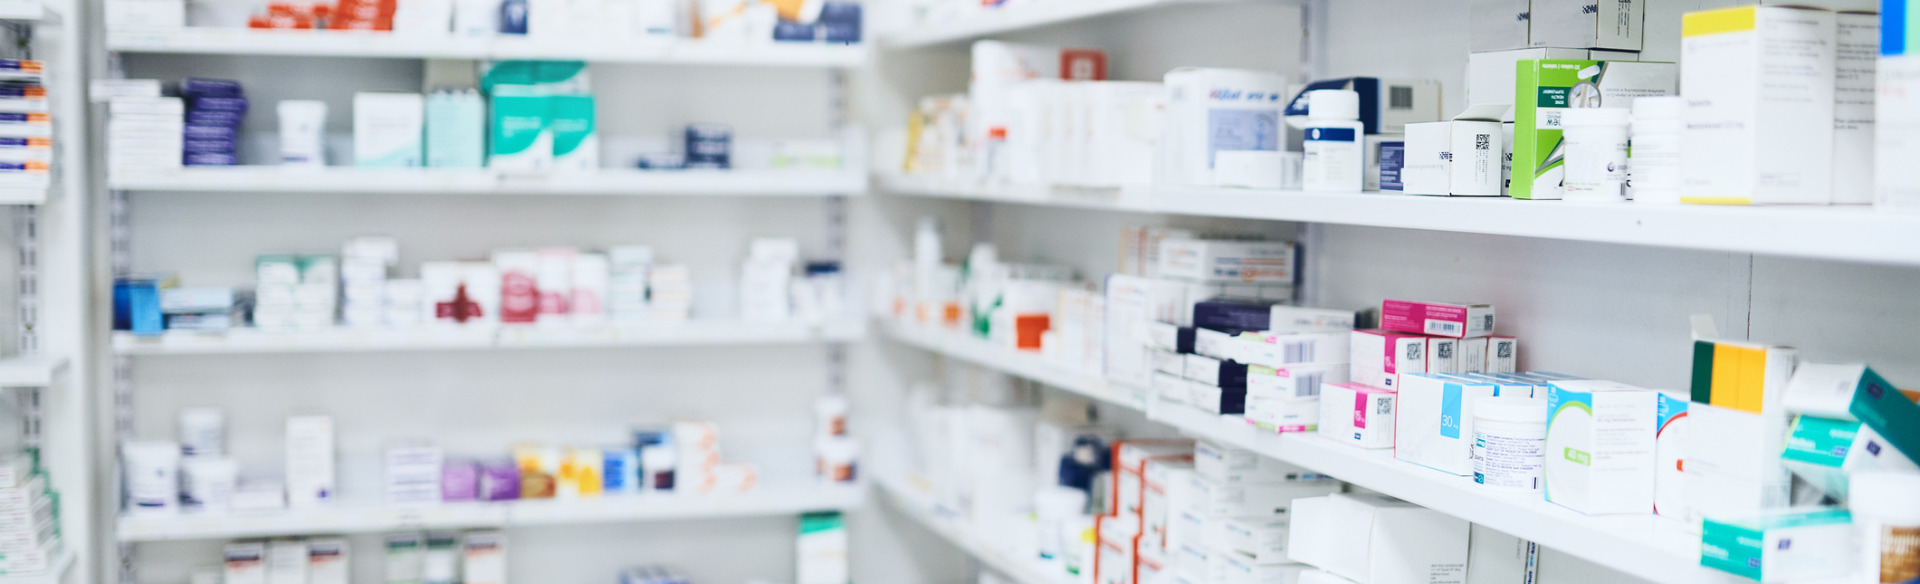 pharmacy shelves with various medications and prescriptions